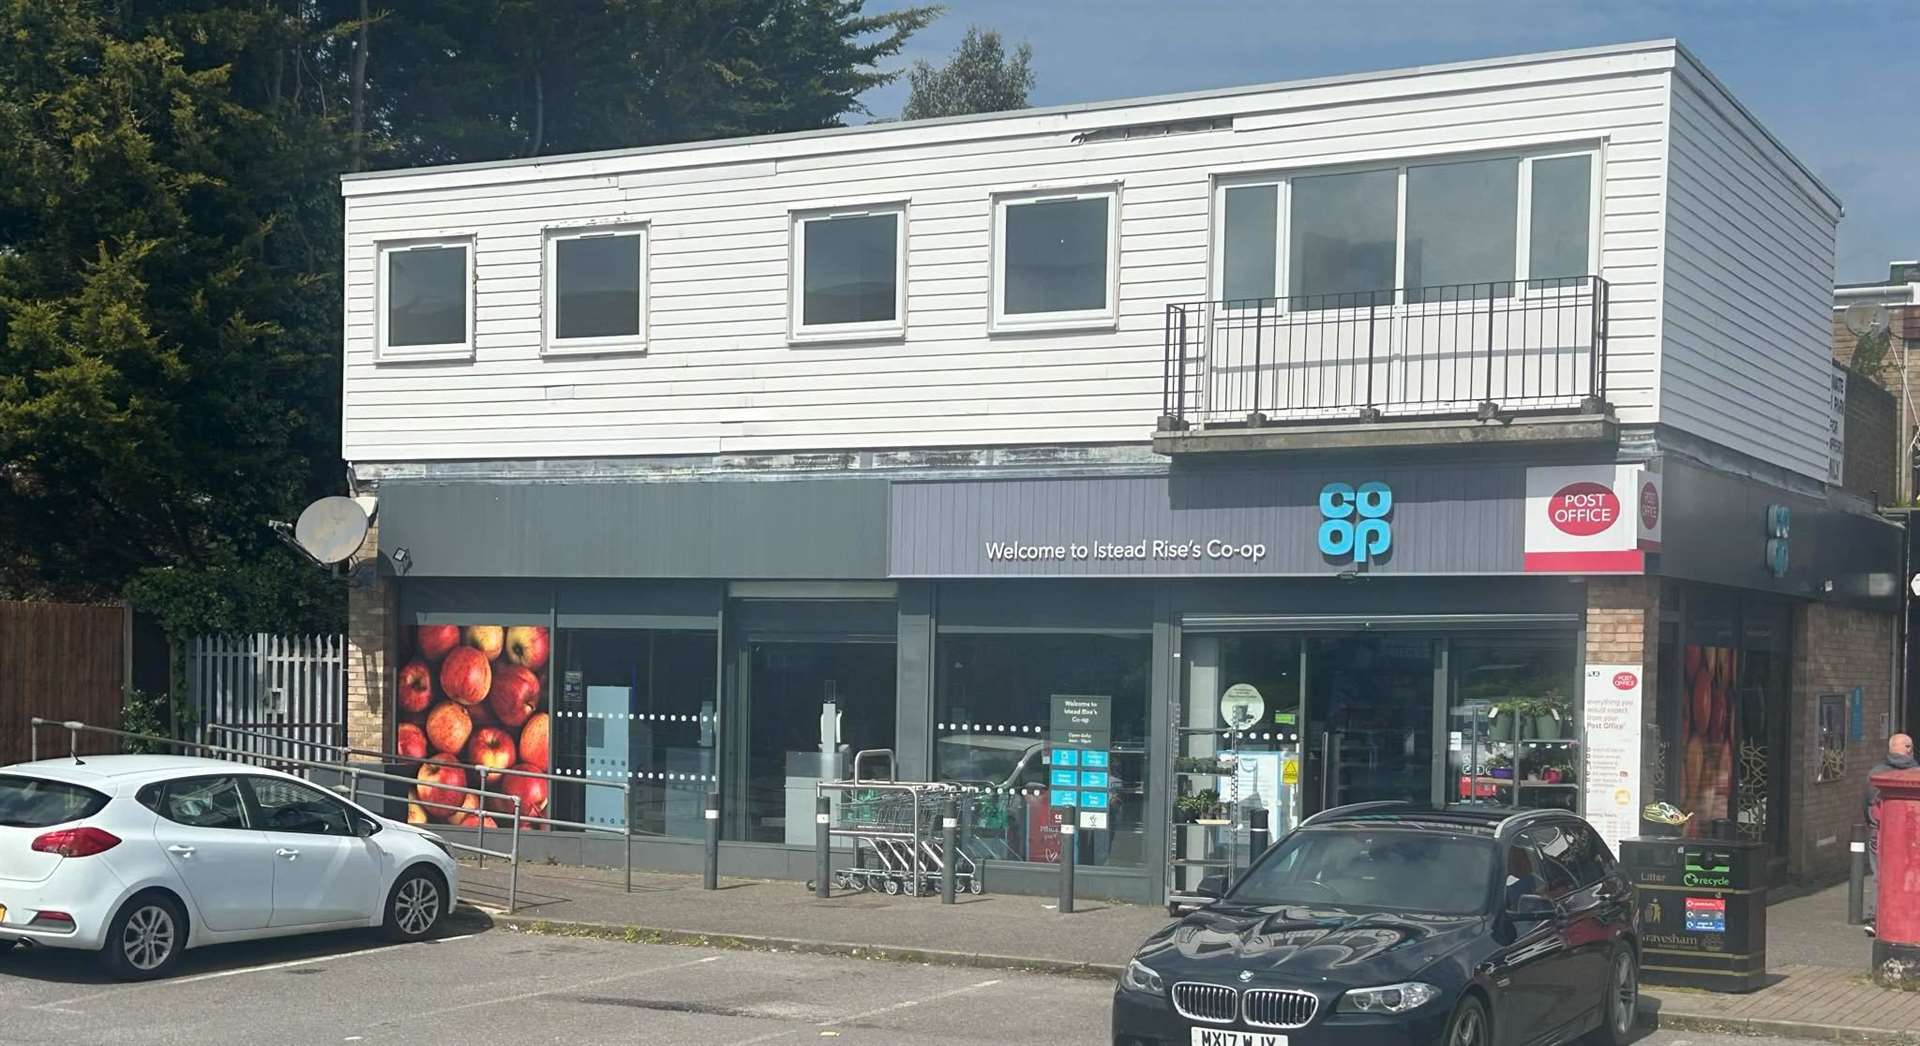 The Co-op in The Parade, Istead Rise, Gravesend